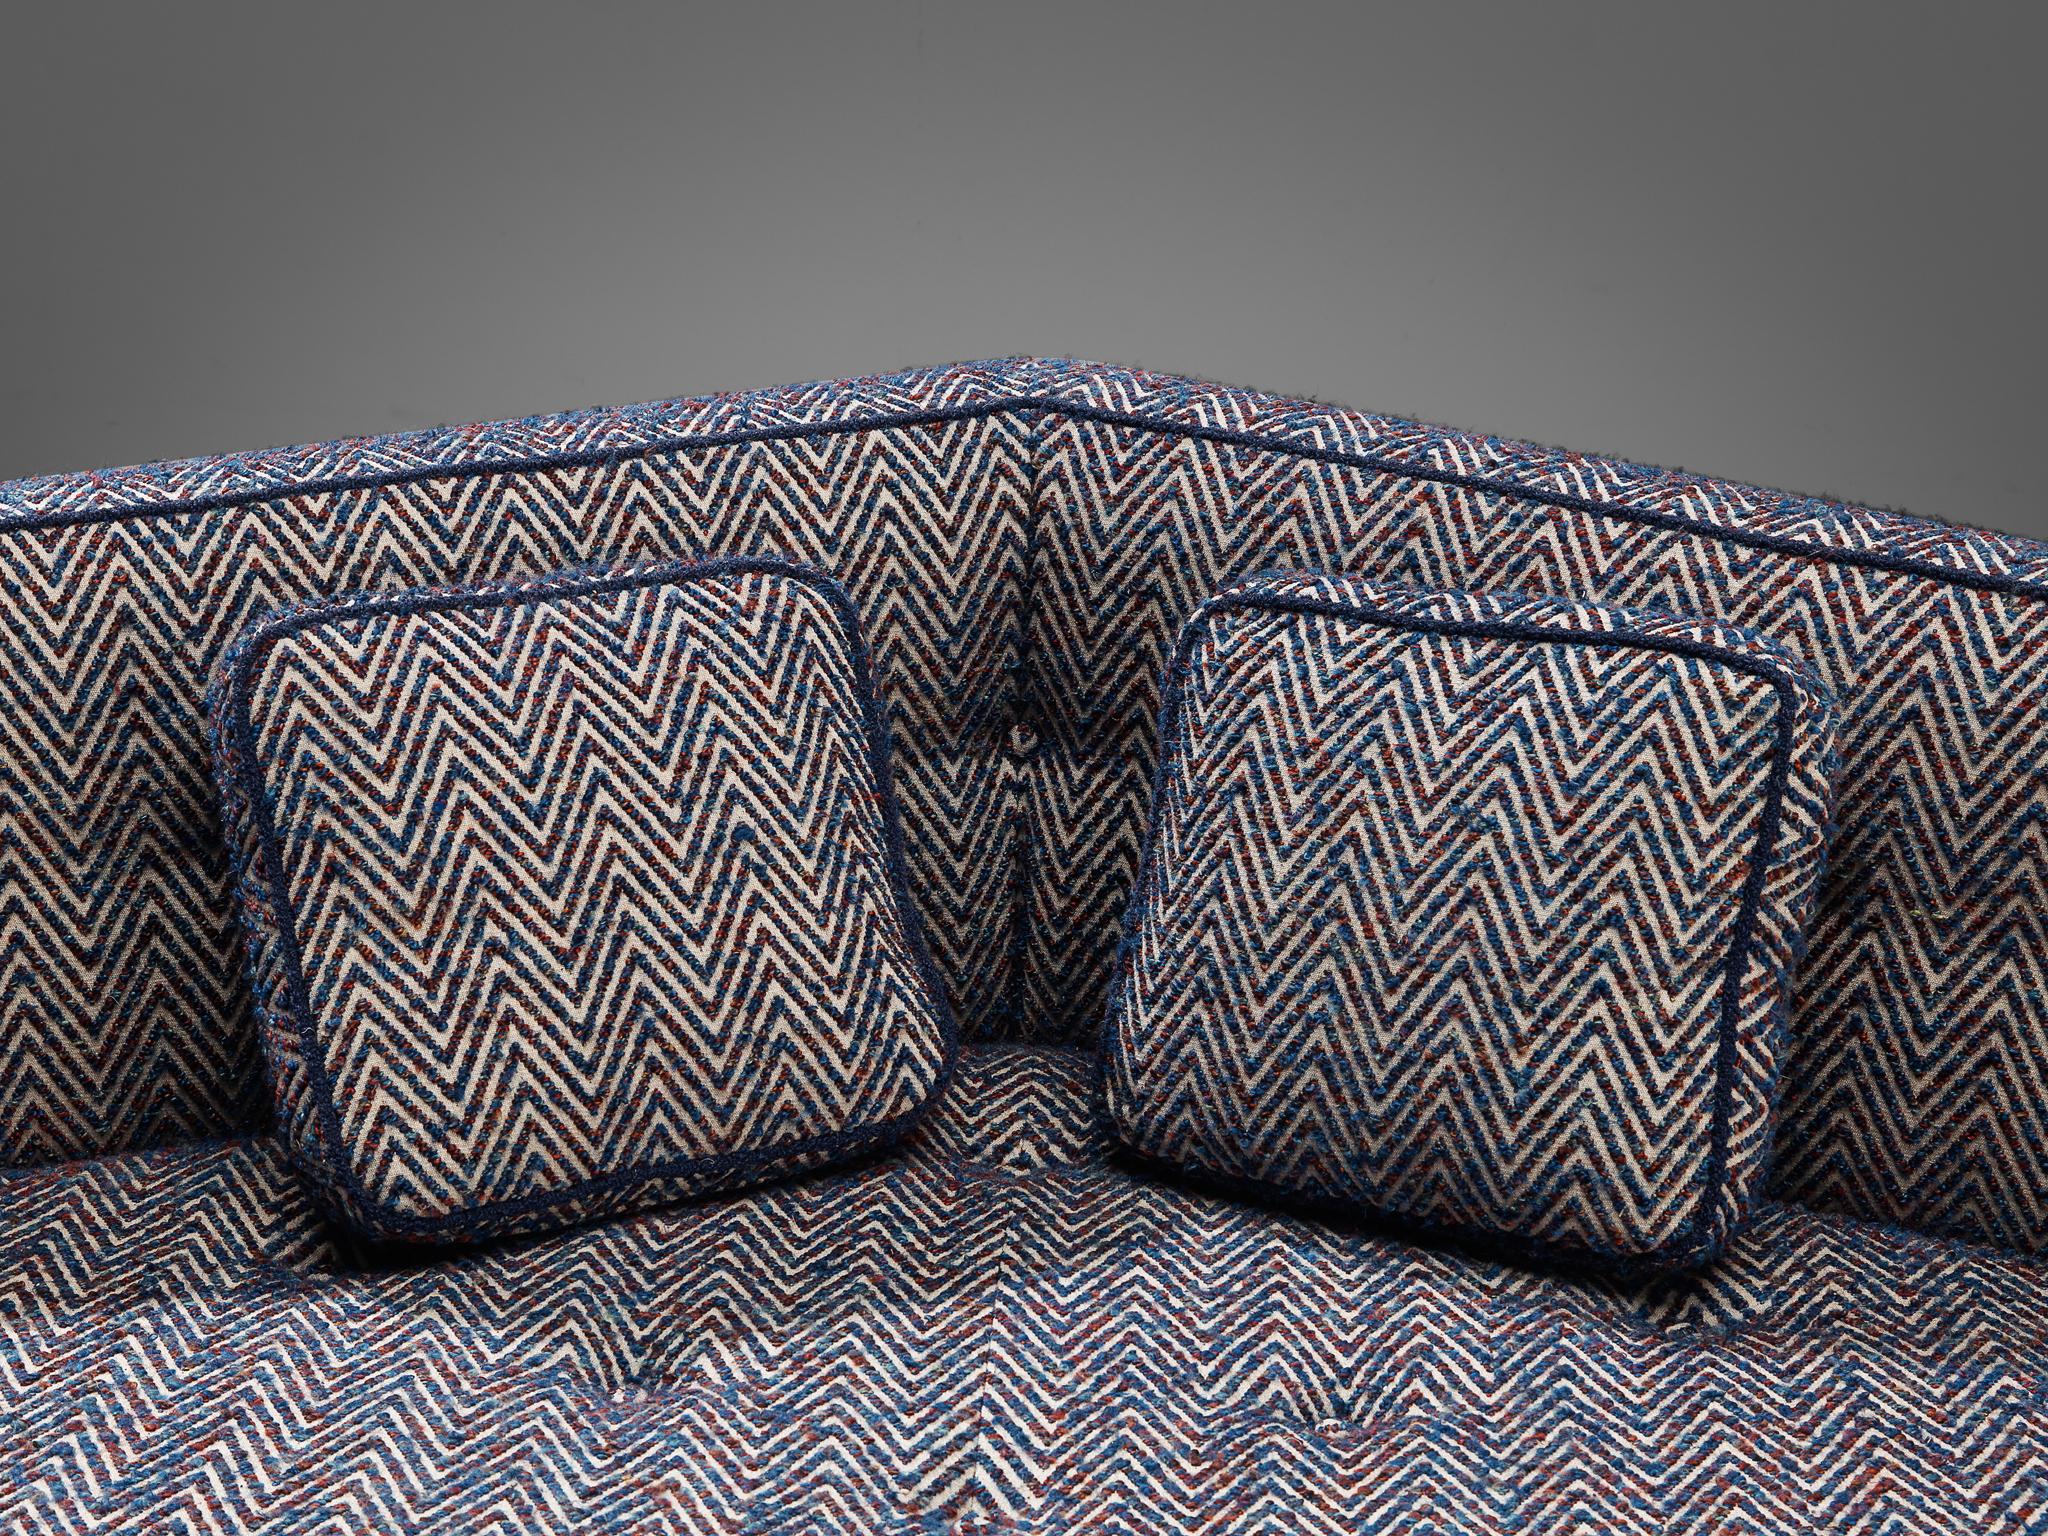 Edward Wormley for Dunbar 'Janus' Sofa in Multicolored Patterned Upholstery  3